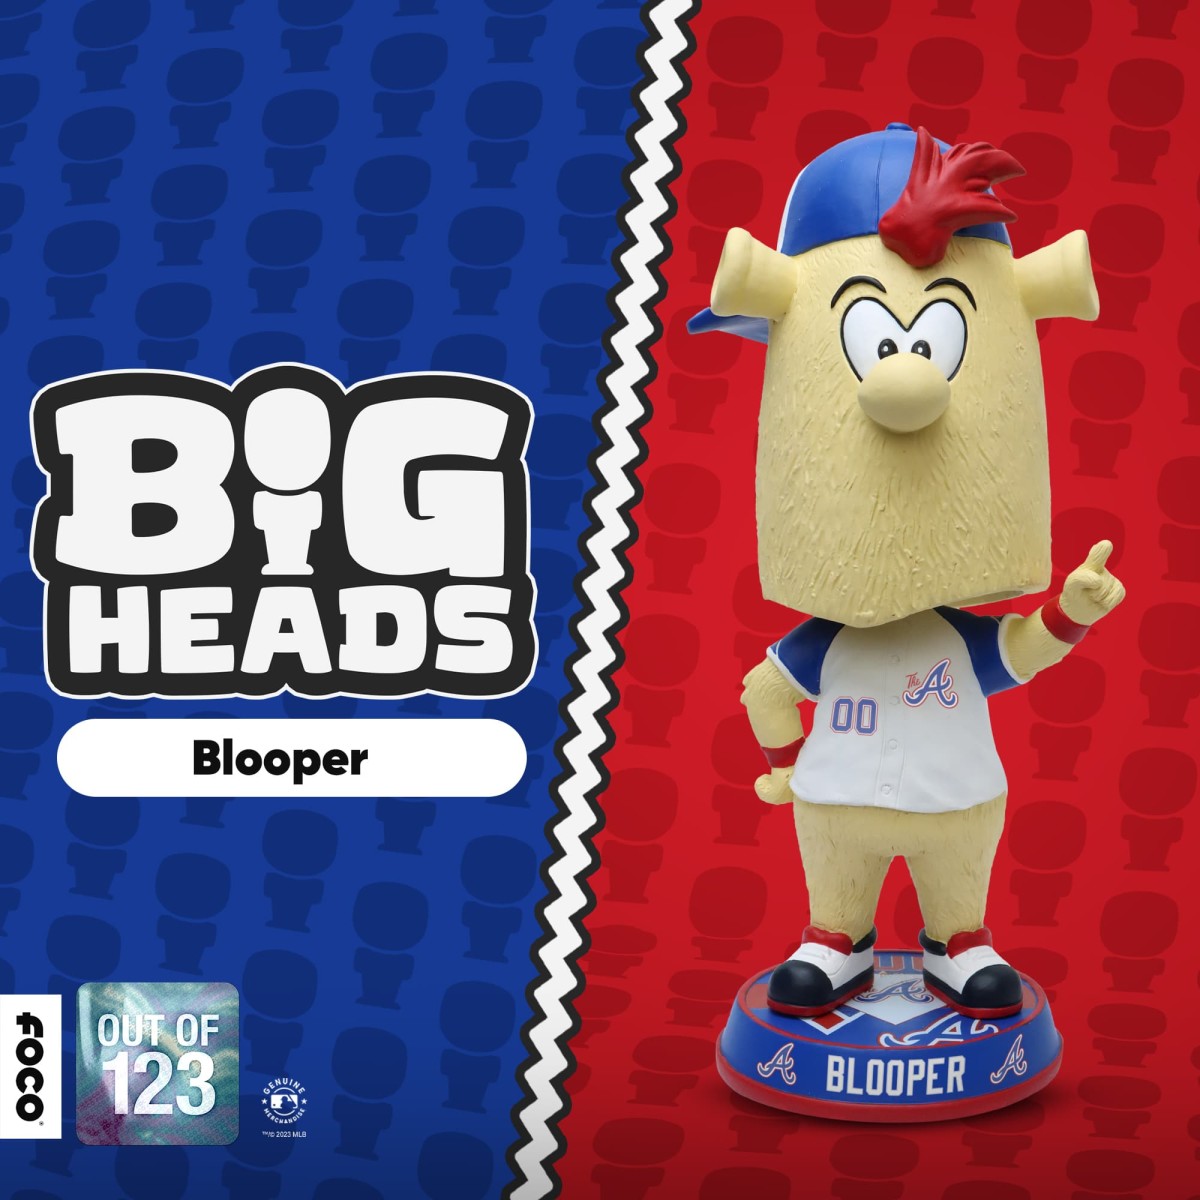 FOCO releases new Big Head bobble with beloved mascot Blooper in